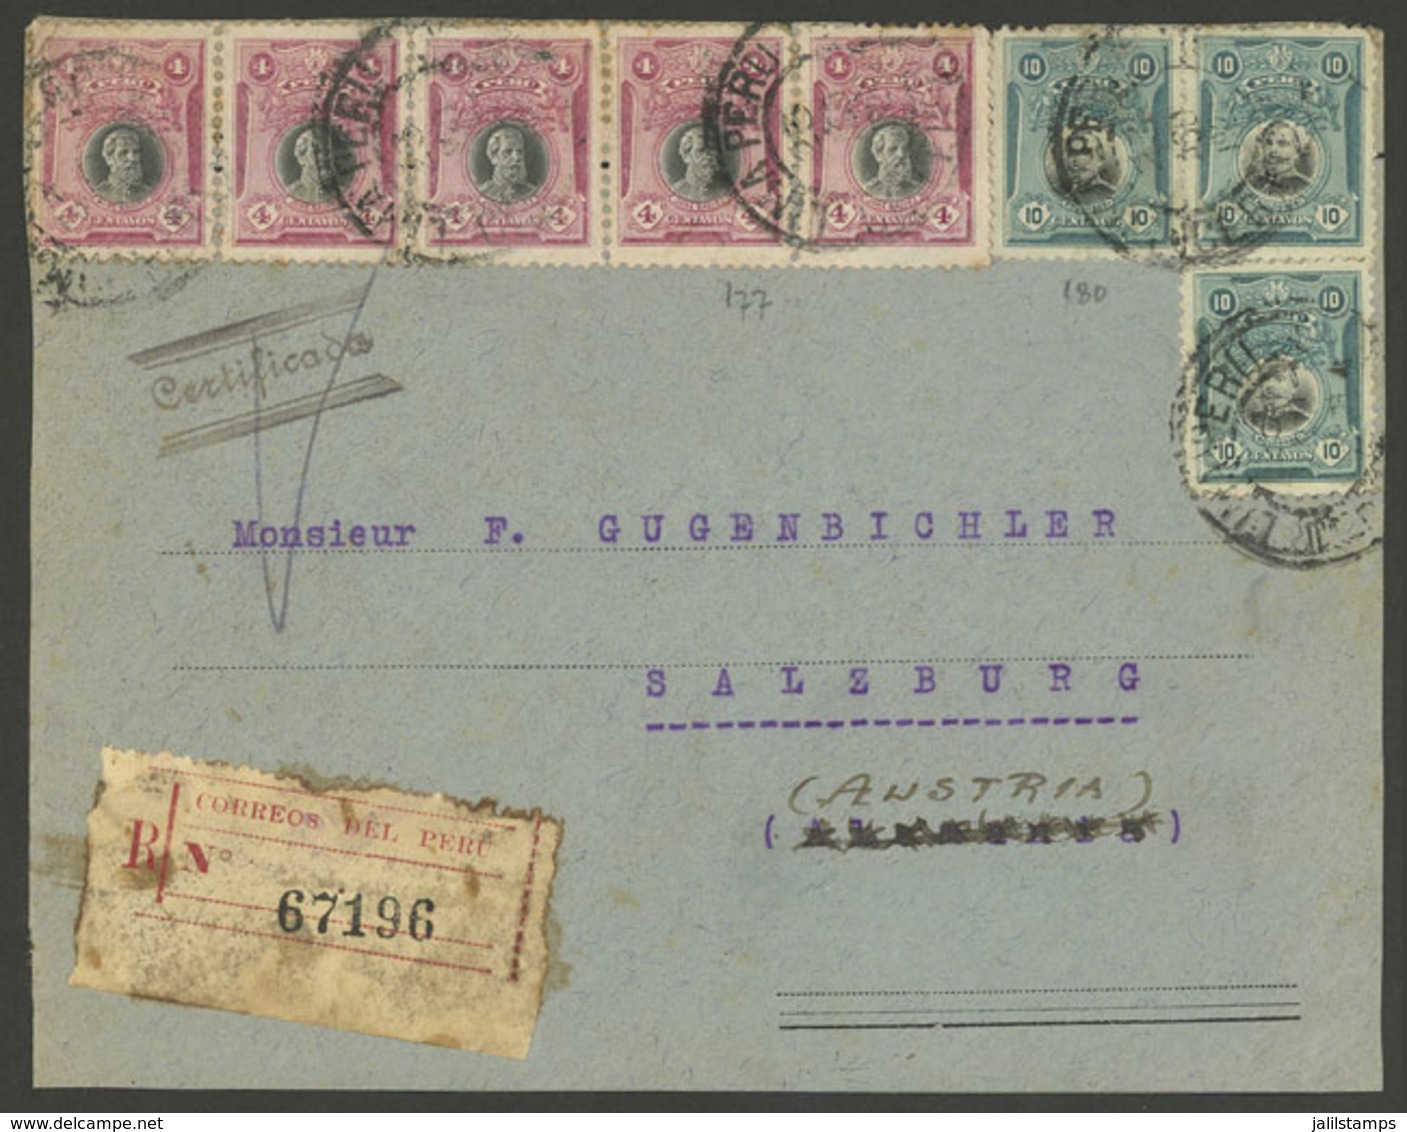 PERU: Circa 1920, Cover Front Sent From Paita To Austria With Attractive Large Postage Of 50c., VF! - Perú